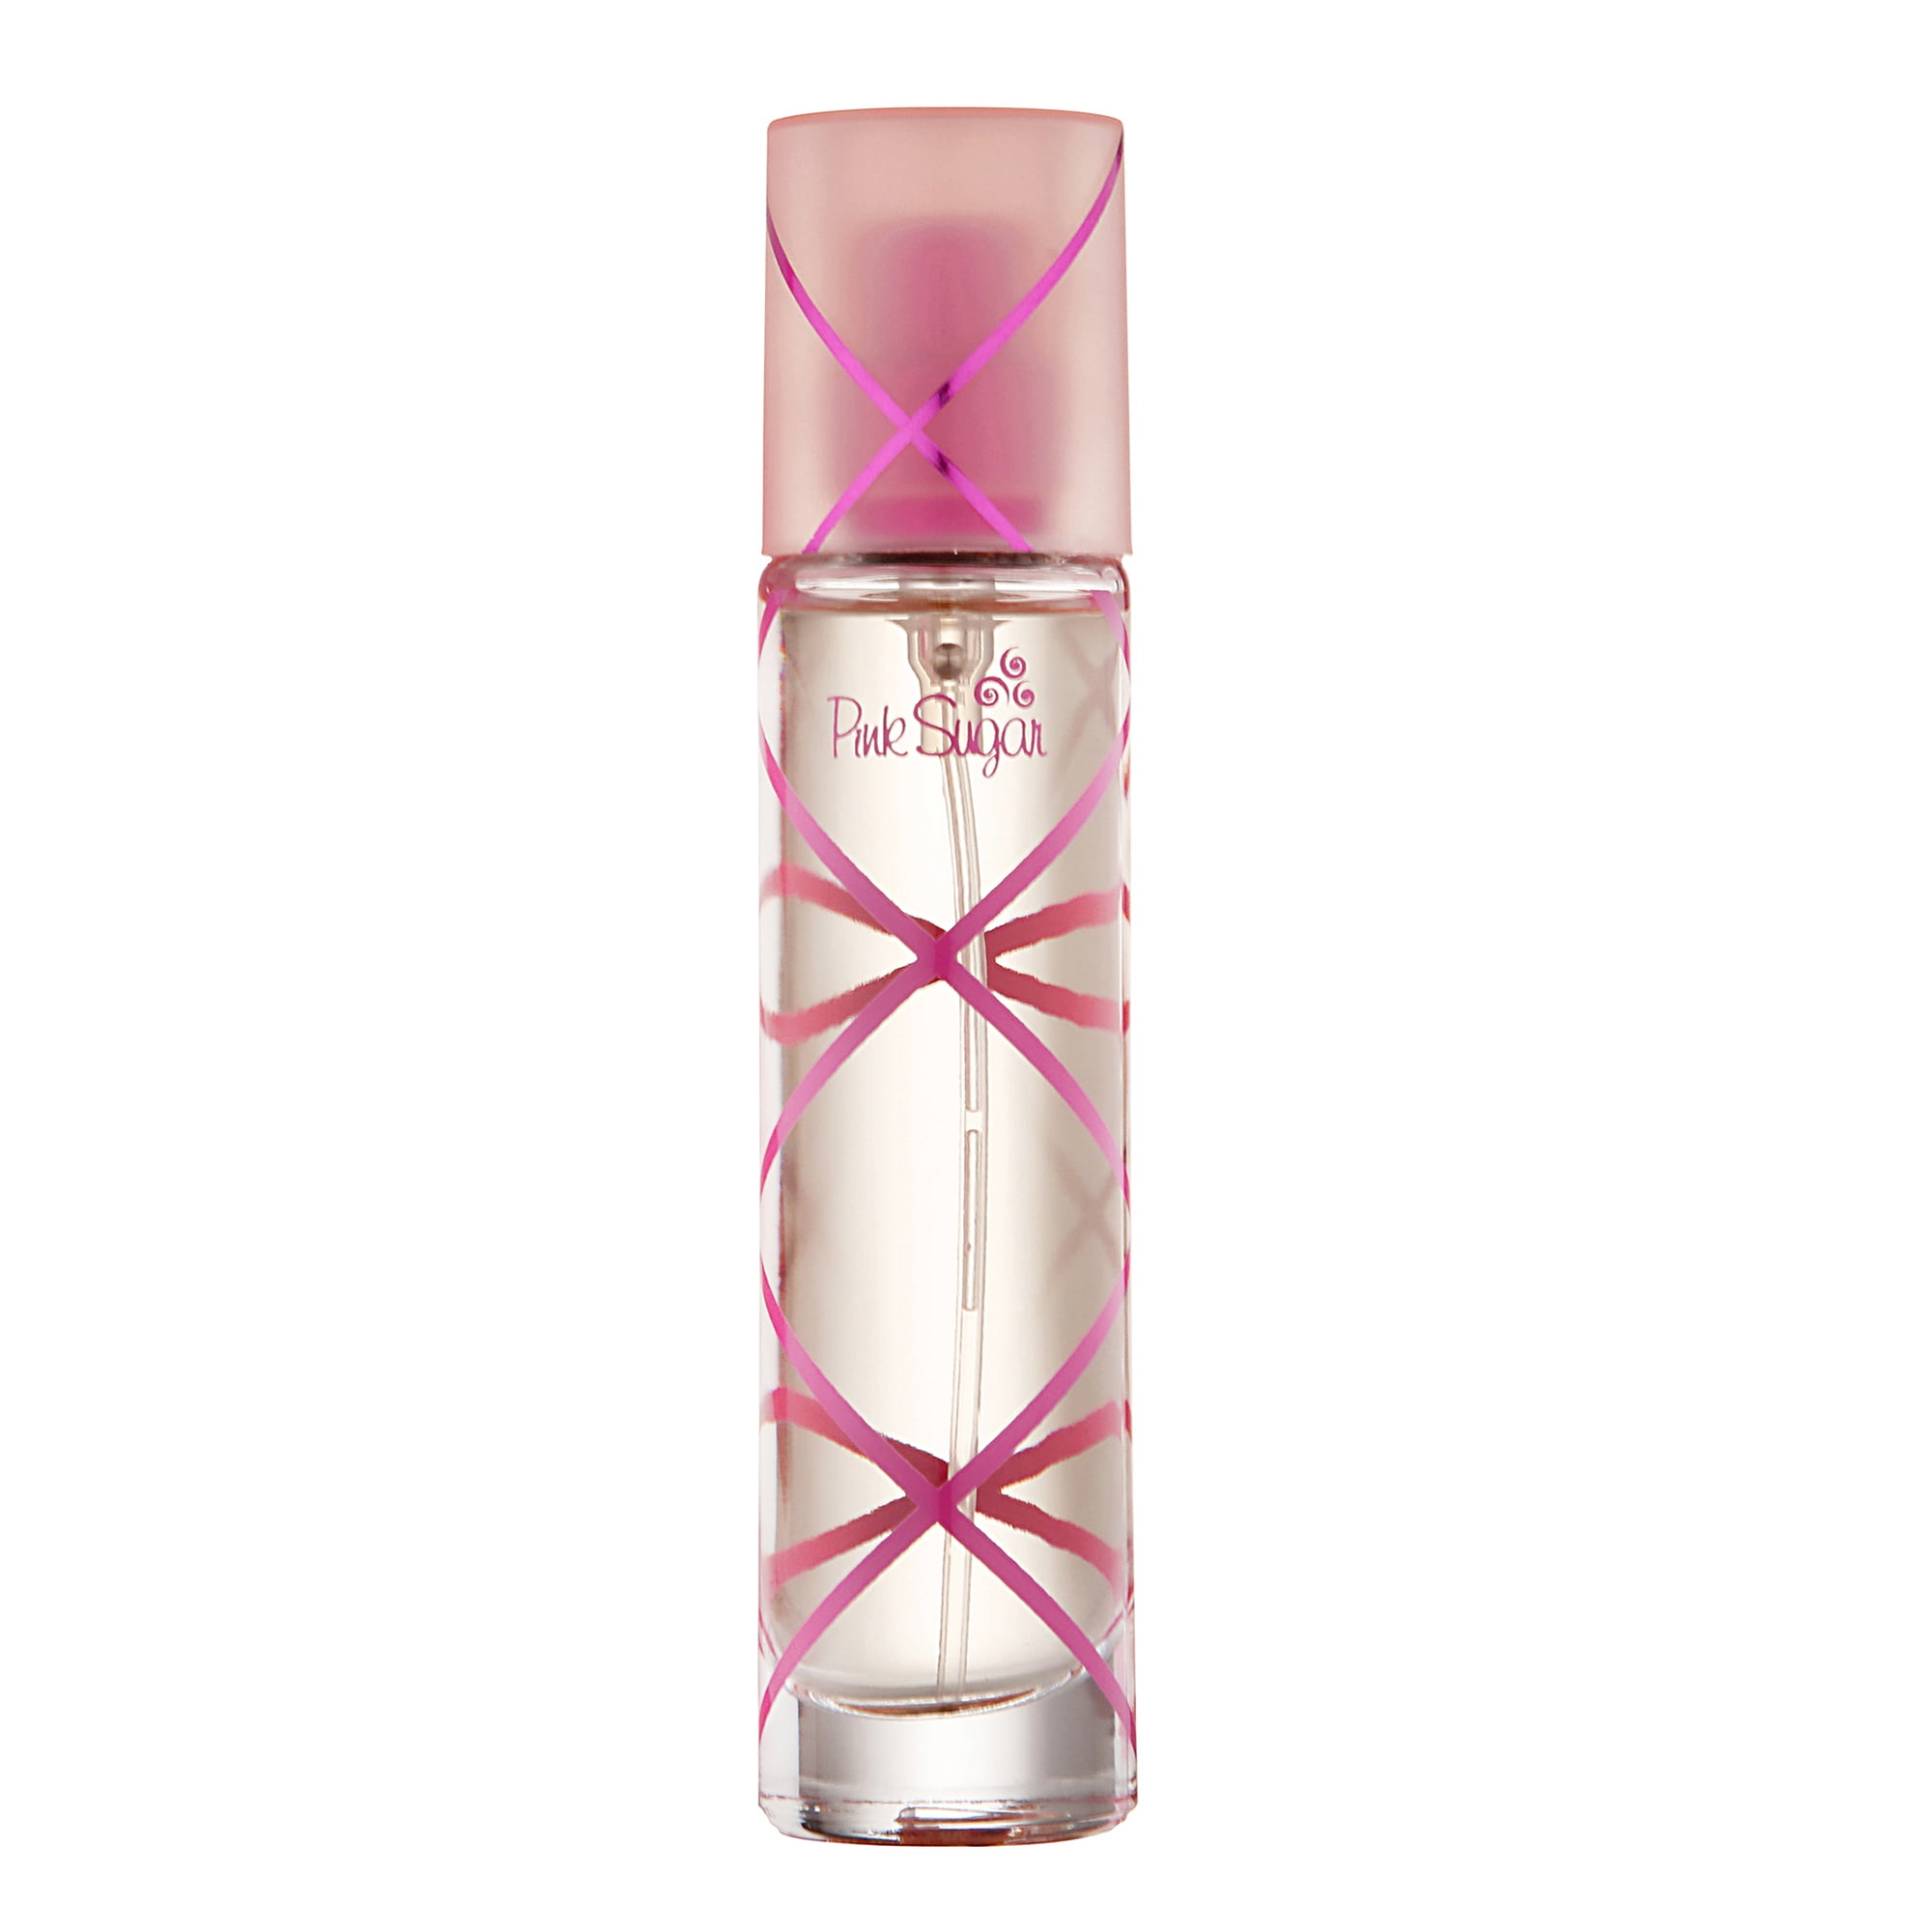 Impression of Pink sugar by Aquolina type perfume Body Oil Roll On 1 o –  World Scents and More